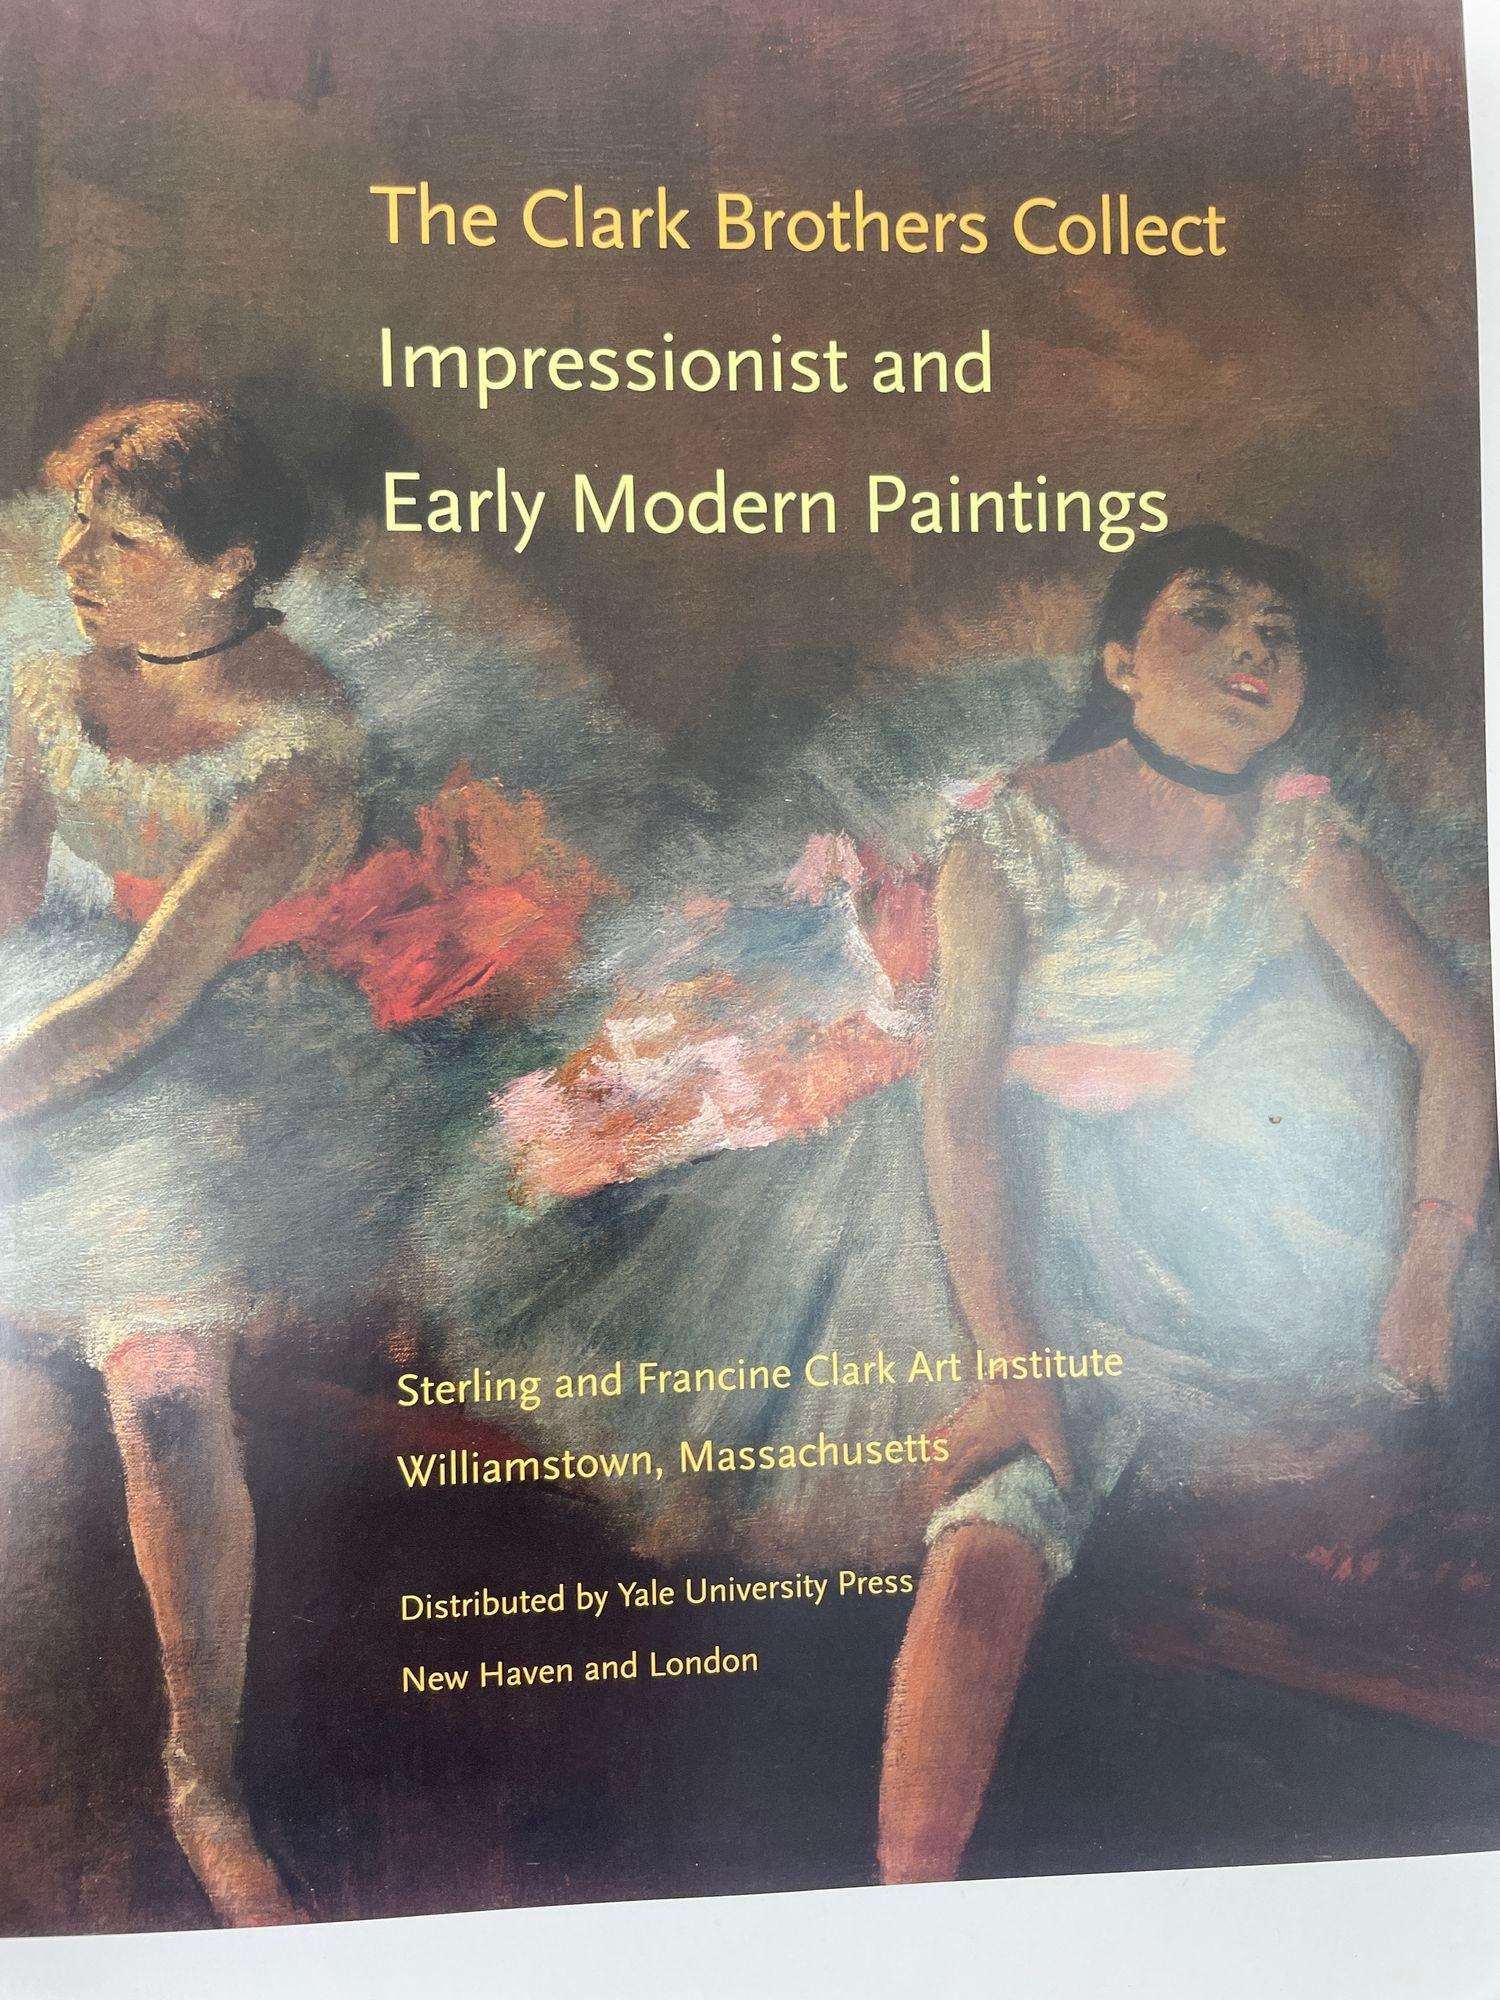 Paper The Clark Brothers Collect Impressionists and Early Modern Painting Hardcover For Sale